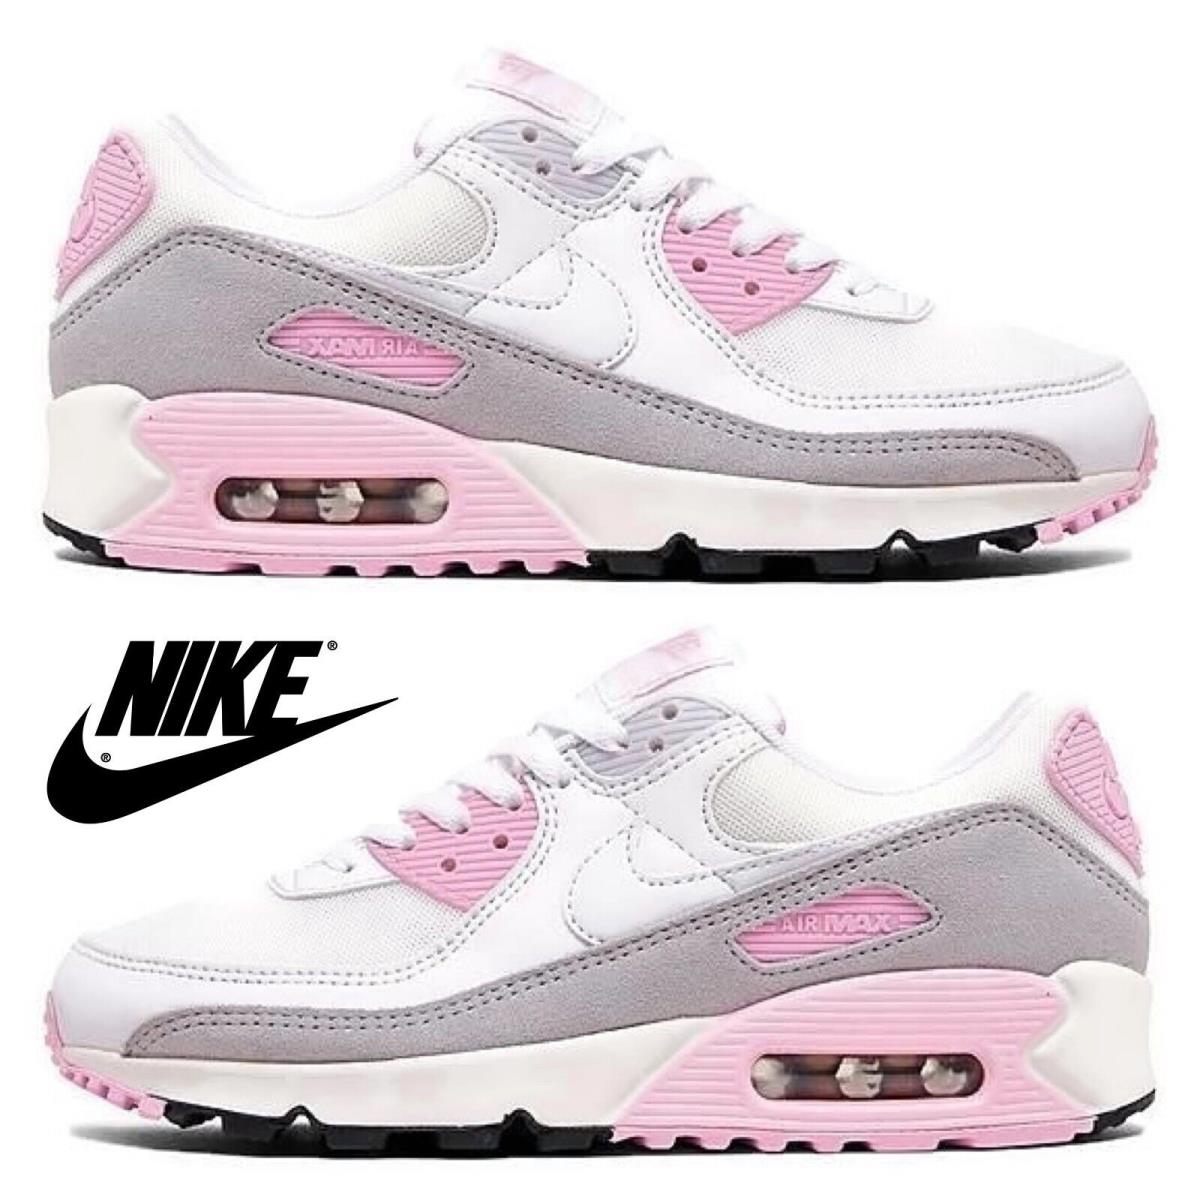 Nike Air Max 90 Women s Sneakers Casual Shoes Premium Running Sport White Pink - White , White/Pink Manufacturer